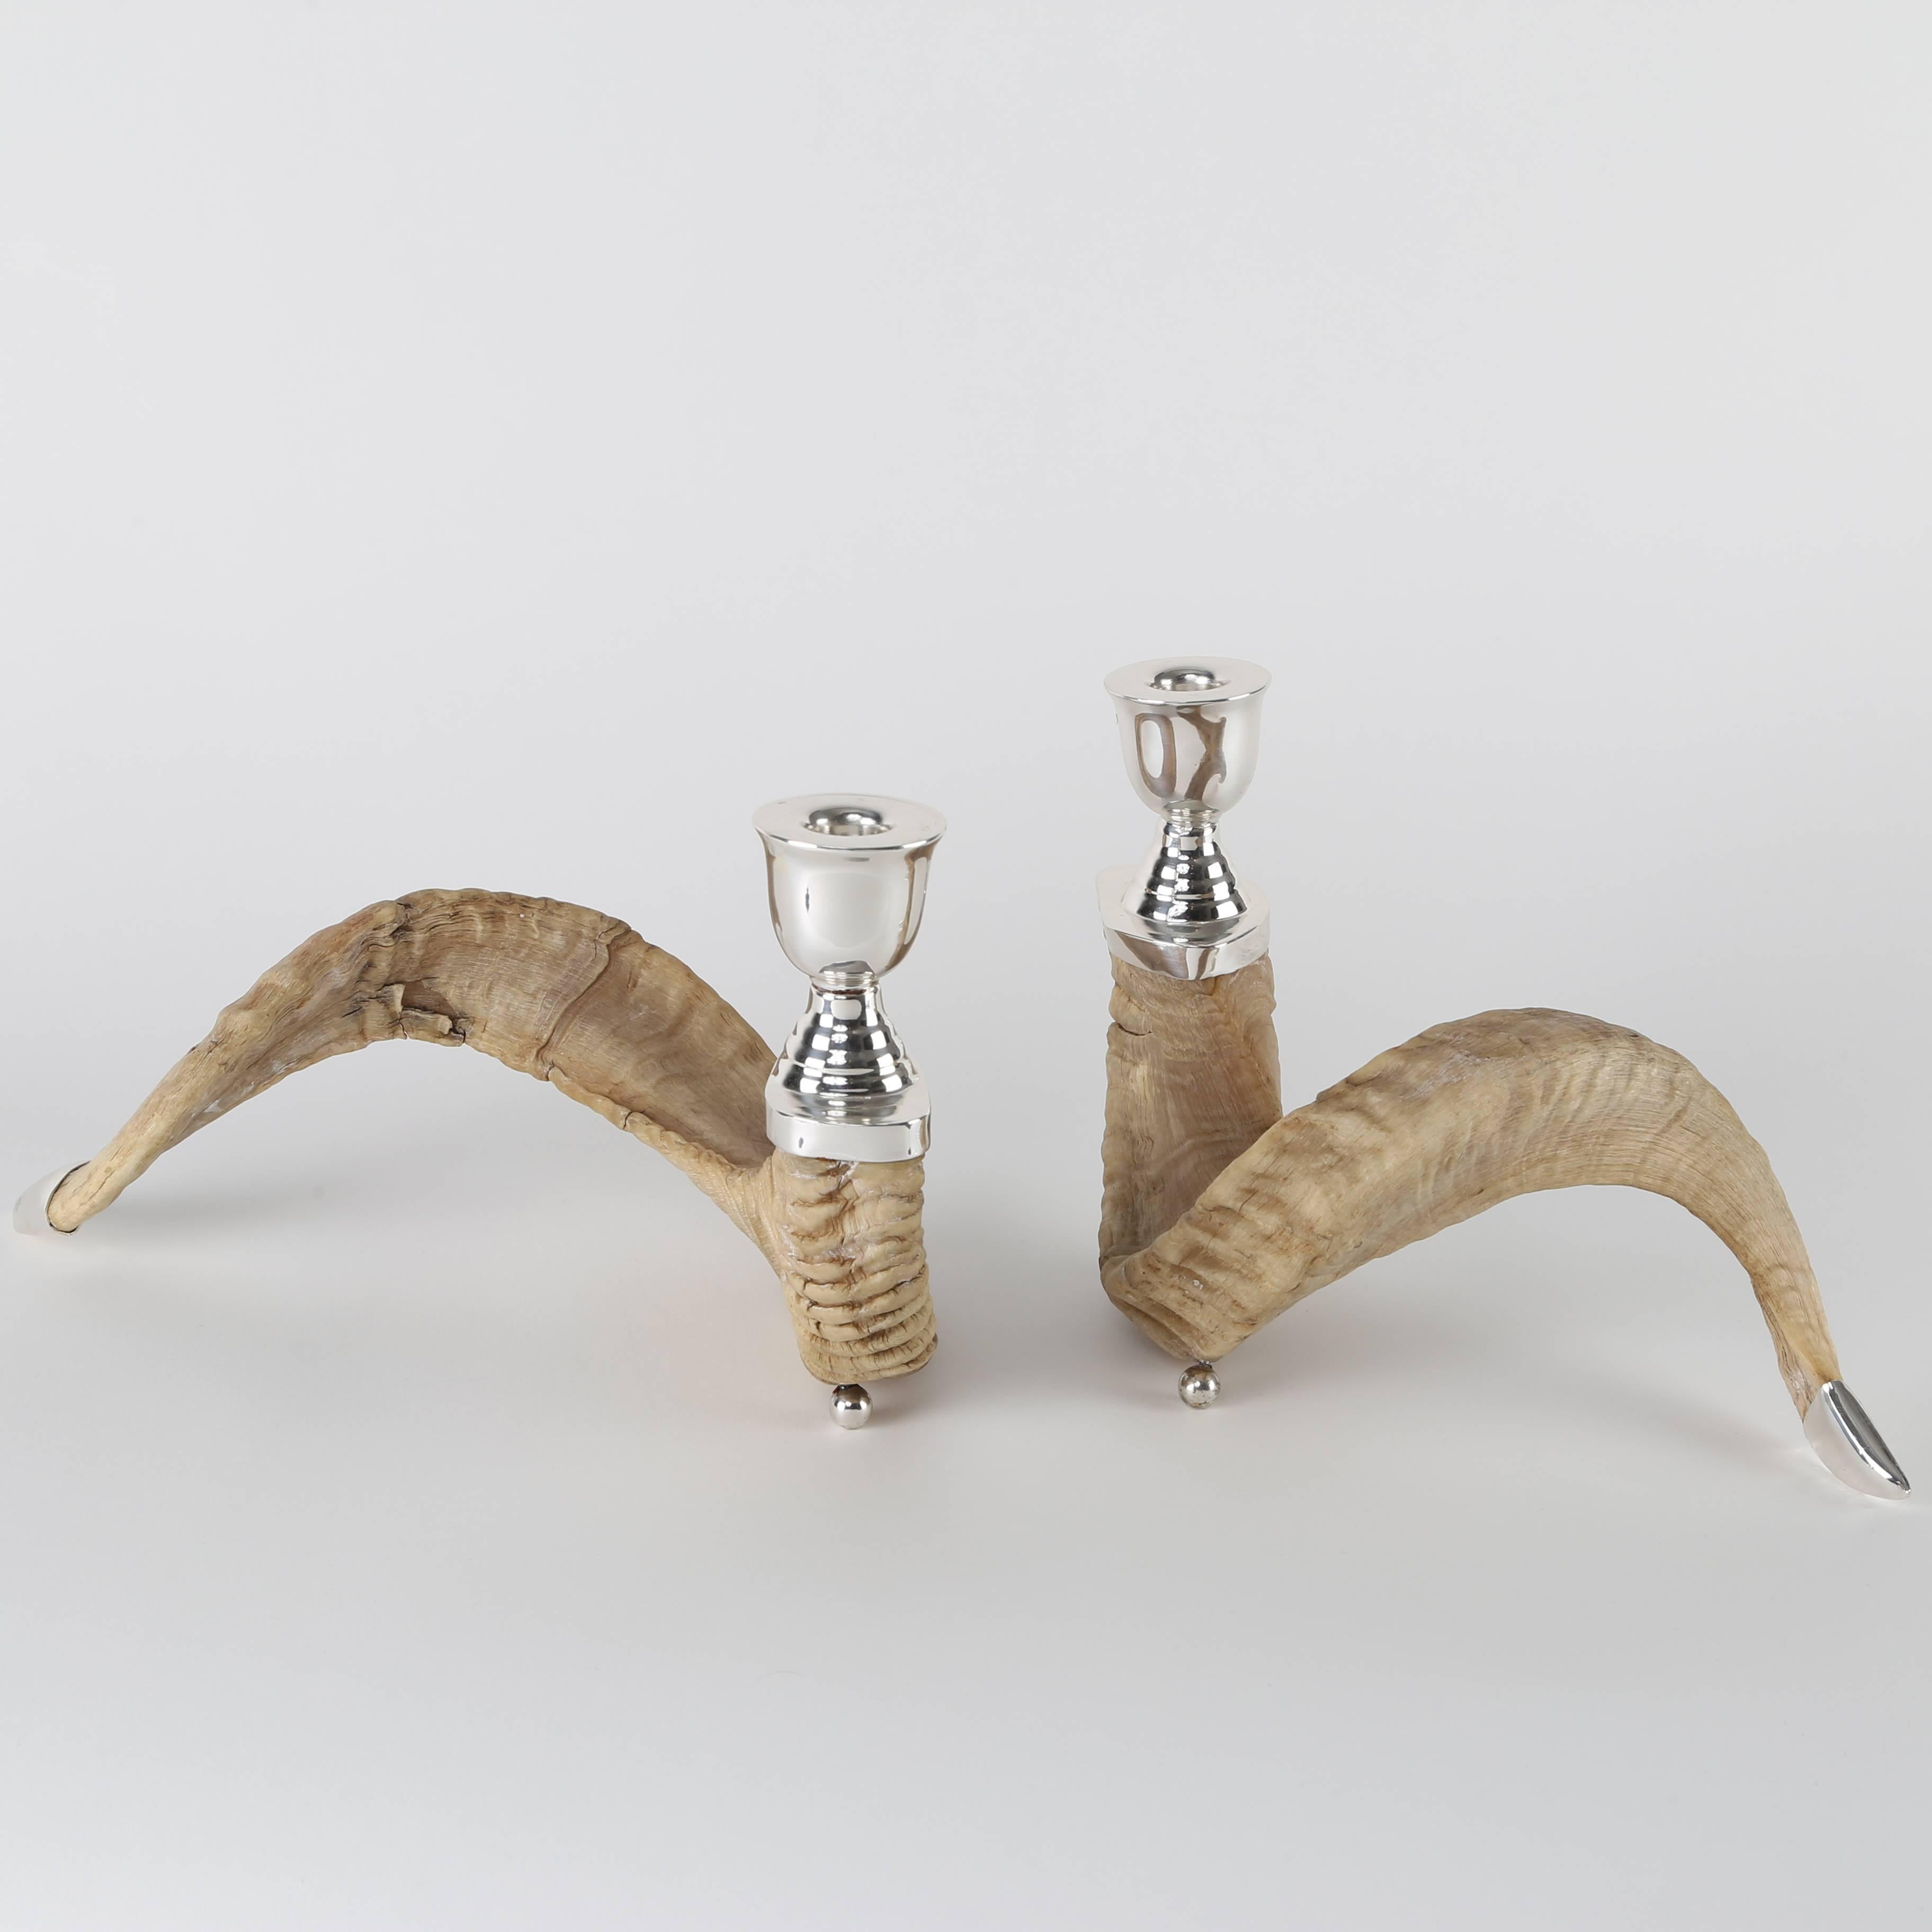 These beautifully curved ram's horns have been converted to candle holders, providing a compelling contrast between the polished-silver fittings and the natural rough texture of the horns. All fittings are newly silver plated. One holder is 11